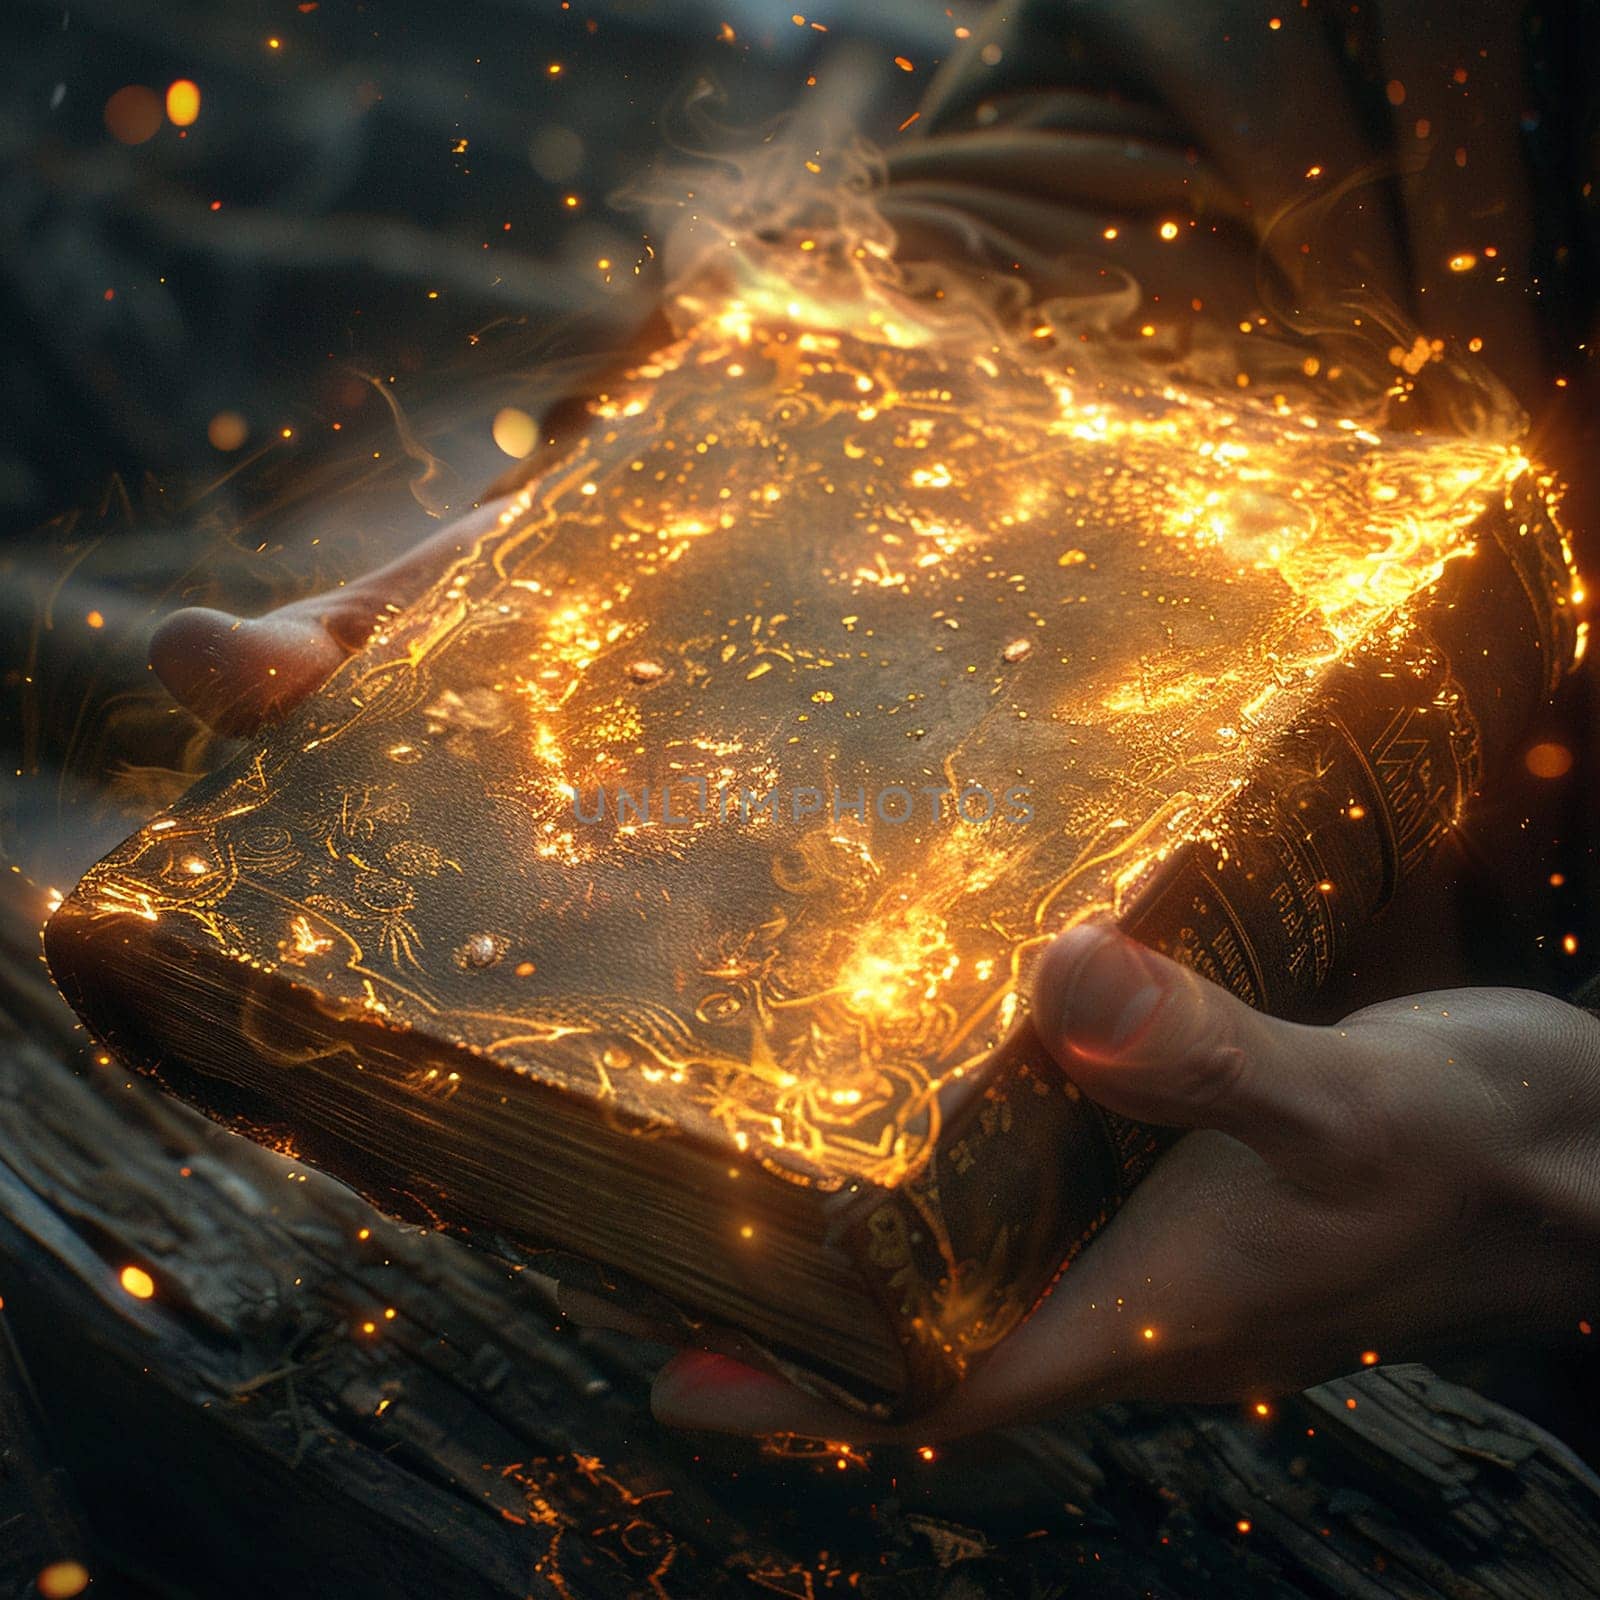 Hands gripping a magical tome that radiates ancient knowledge, illustrated with ethereal light effects.